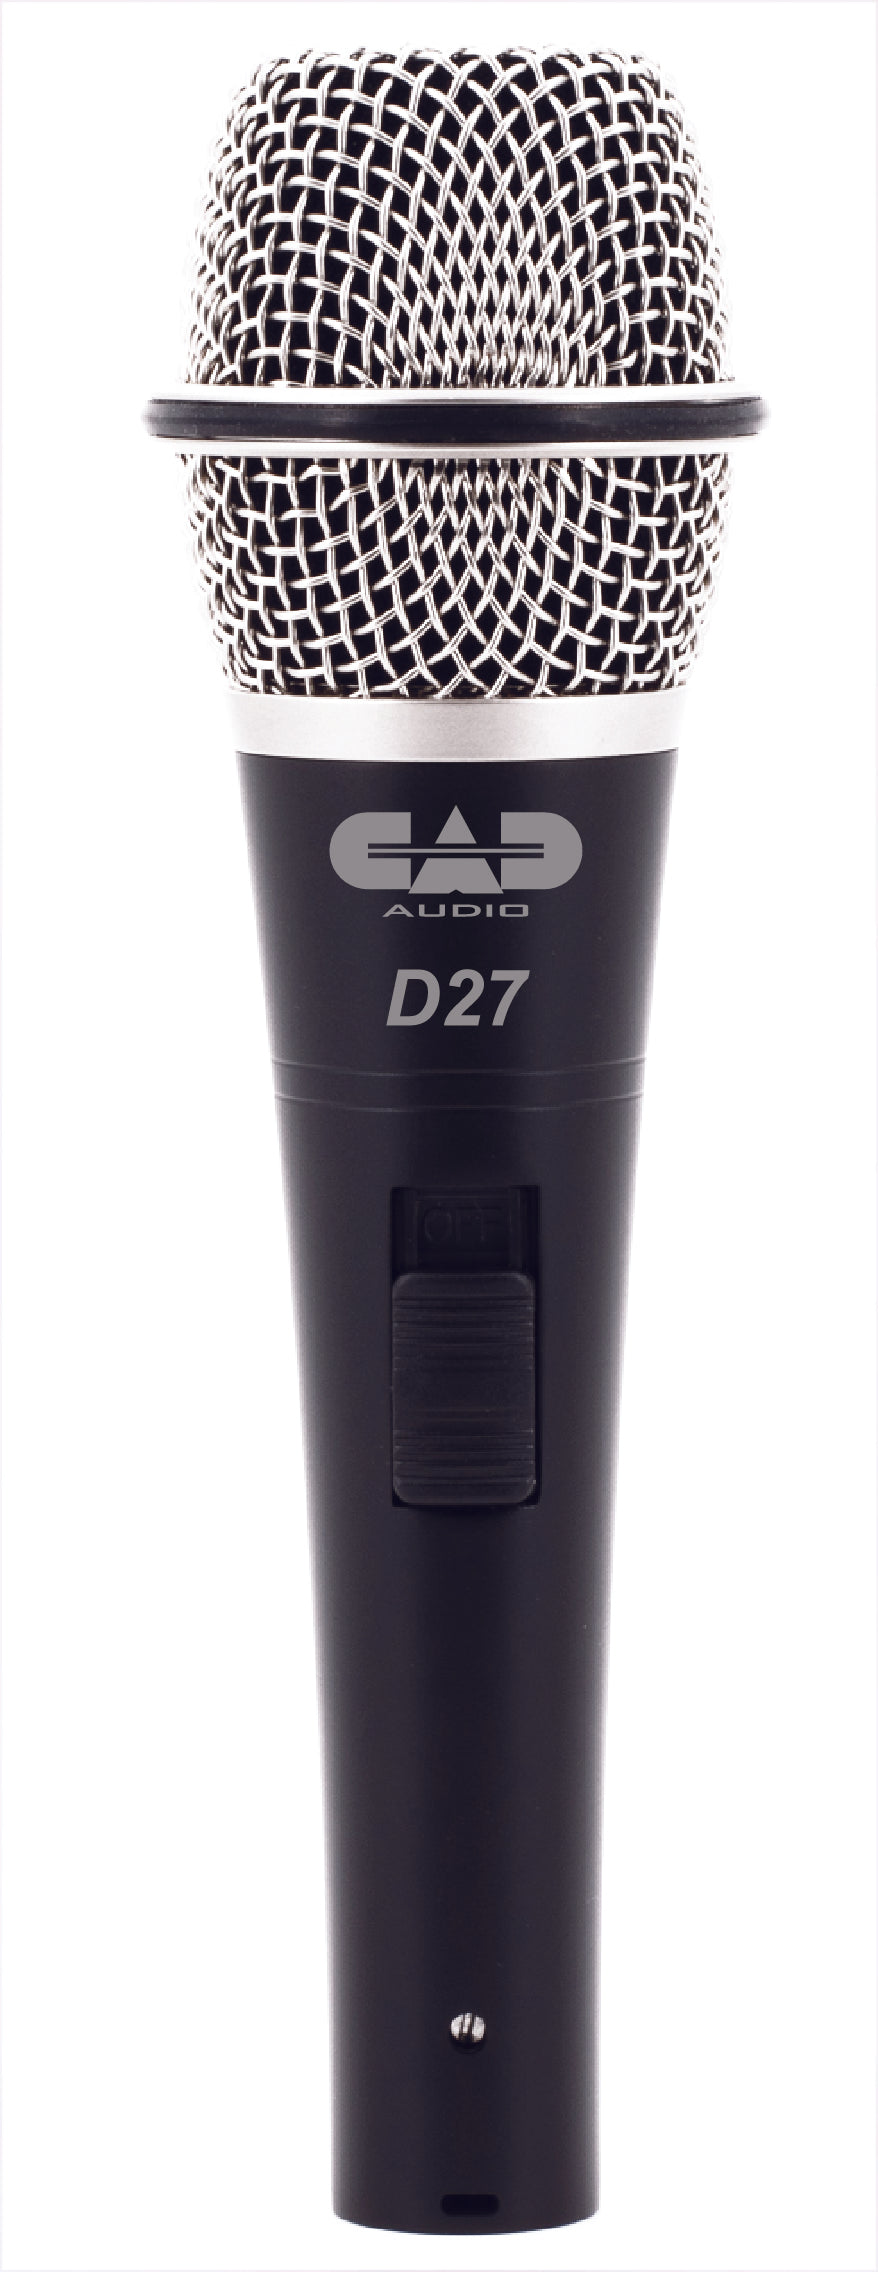 CAD D27 SuperCardioid Dynamic Handheld Microphone